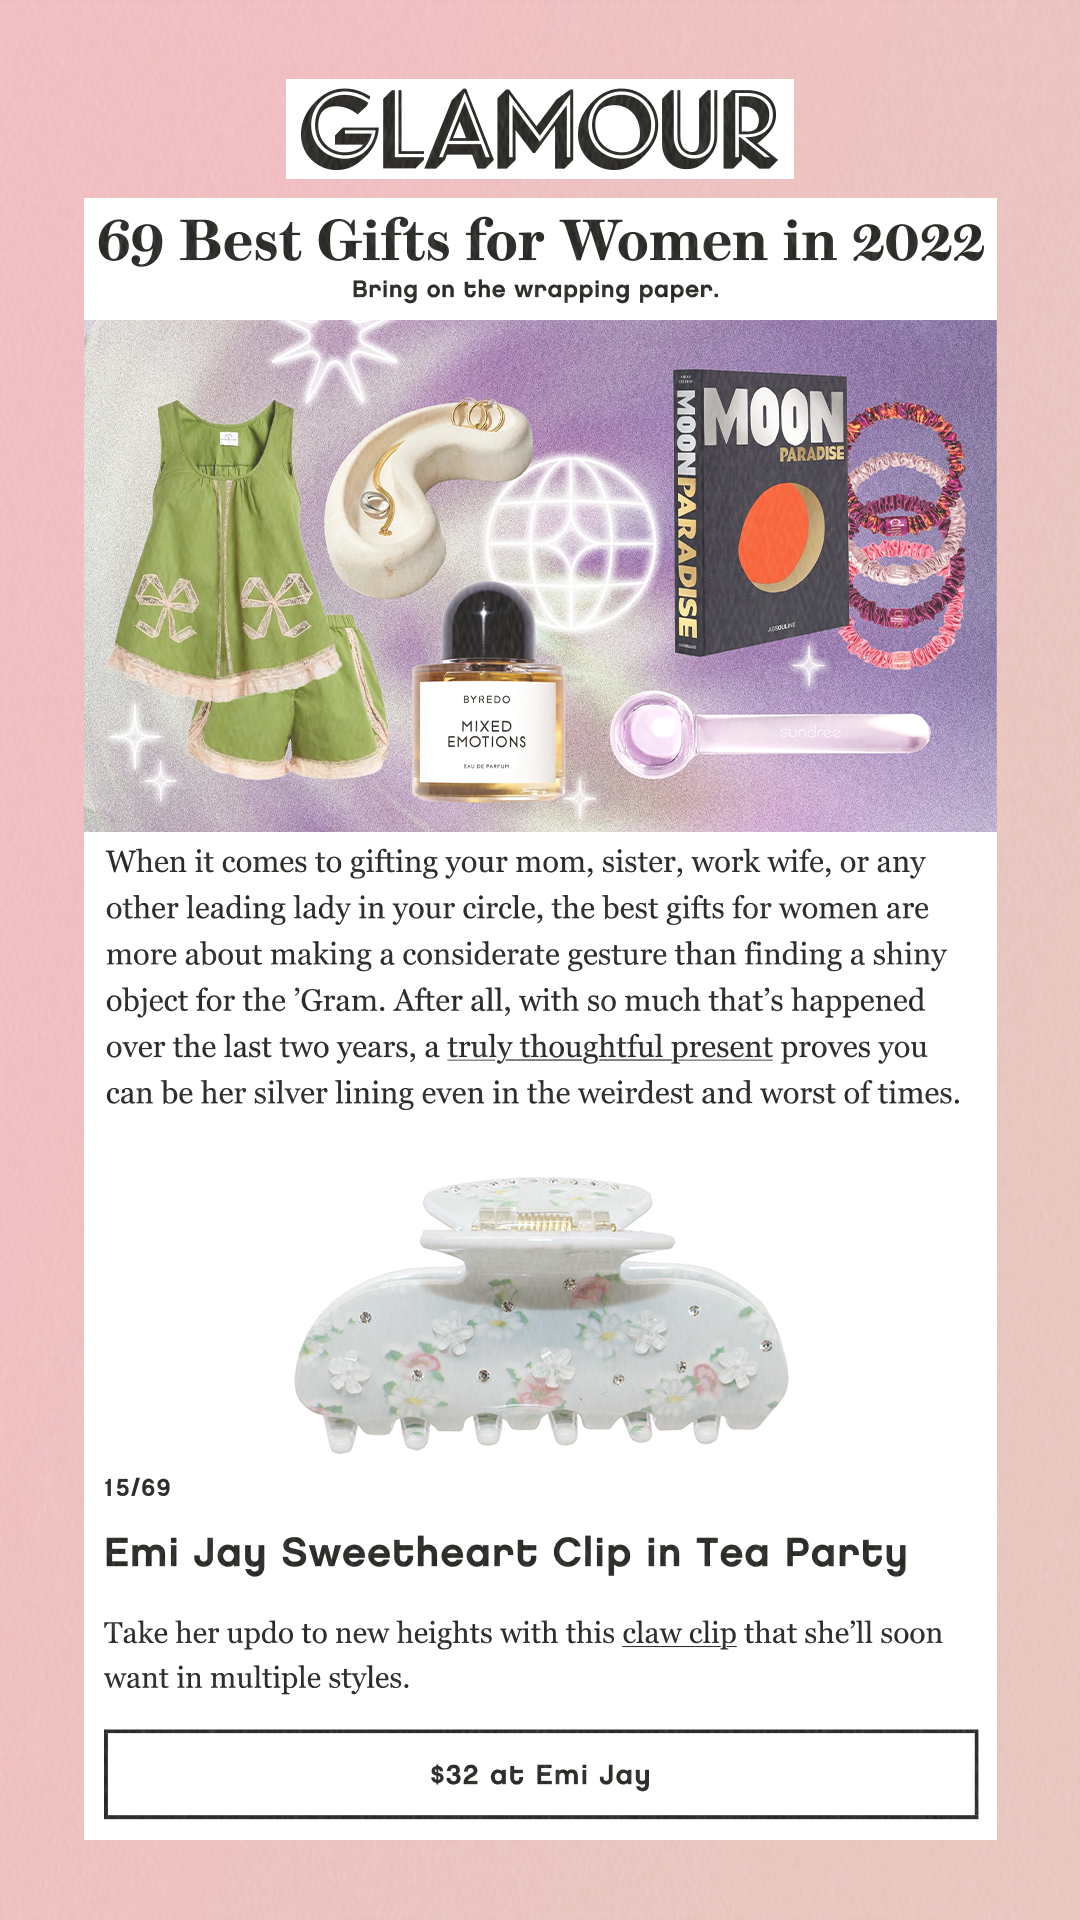 69 Best Gifts for Women in 2022 Bring on the wrapping paper. When it comes to gifting your mom, sister, work wife, or any other leading lady in your circle, the best gifts for women are more about making a considerate gesture than finding a shiny object for the ’Gram. After all, with so much that’s happened over the last two years, a truly thoughtful present proves you can be her silver lining even in the weirdest and worst of times. 15/69 Emi Jay Sweetheart Clip in Tea Party Take her updo to new heights with this claw clip that she’ll soon want in multiple styles.  $32 at Emi Jay